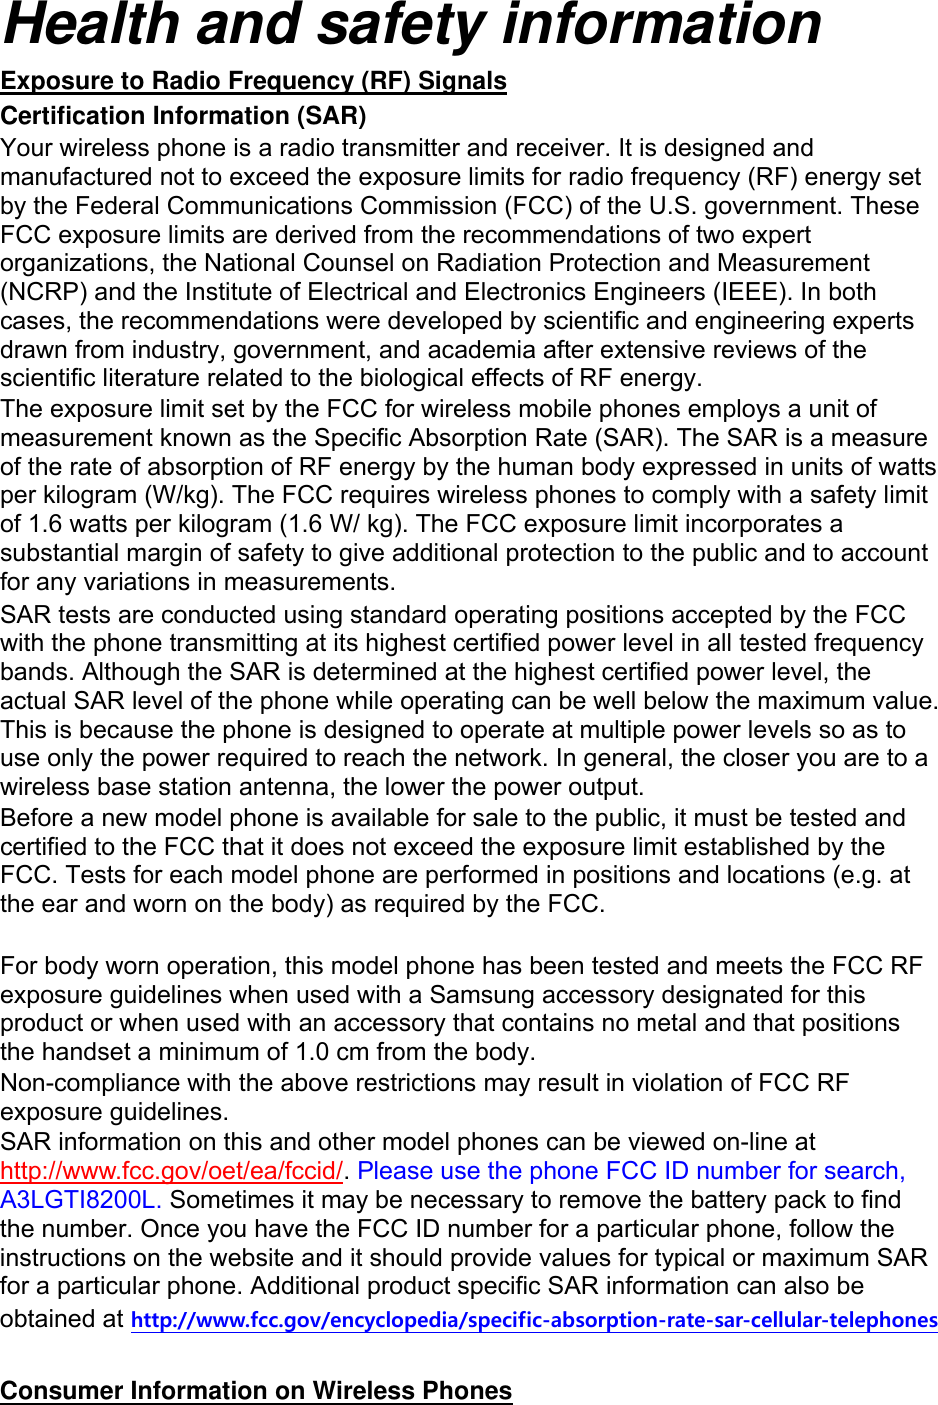 Health and safety information Exposure to Radio Frequency (RF) Signals Certification Information (SAR) Your wireless phone is a radio transmitter and receiver. It is designed and manufactured not to exceed the exposure limits for radio frequency (RF) energy set by the Federal Communications Commission (FCC) of the U.S. government. These FCC exposure limits are derived from the recommendations of two expert organizations, the National Counsel on Radiation Protection and Measurement (NCRP) and the Institute of Electrical and Electronics Engineers (IEEE). In both cases, the recommendations were developed by scientific and engineering experts drawn from industry, government, and academia after extensive reviews of the scientific literature related to the biological effects of RF energy. The exposure limit set by the FCC for wireless mobile phones employs a unit of measurement known as the Specific Absorption Rate (SAR). The SAR is a measure of the rate of absorption of RF energy by the human body expressed in units of watts per kilogram (W/kg). The FCC requires wireless phones to comply with a safety limit of 1.6 watts per kilogram (1.6 W/ kg). The FCC exposure limit incorporates a substantial margin of safety to give additional protection to the public and to account for any variations in measurements. SAR tests are conducted using standard operating positions accepted by the FCC with the phone transmitting at its highest certified power level in all tested frequency bands. Although the SAR is determined at the highest certified power level, the actual SAR level of the phone while operating can be well below the maximum value. This is because the phone is designed to operate at multiple power levels so as to use only the power required to reach the network. In general, the closer you are to a wireless base station antenna, the lower the power output. Before a new model phone is available for sale to the public, it must be tested and certified to the FCC that it does not exceed the exposure limit established by the FCC. Tests for each model phone are performed in positions and locations (e.g. at the ear and worn on the body) as required by the FCC.      For body worn operation, this model phone has been tested and meets the FCC RF exposure guidelines when used with a Samsung accessory designated for this product or when used with an accessory that contains no metal and that positions the handset a minimum of 1.0 cm from the body.   Non-compliance with the above restrictions may result in violation of FCC RF exposure guidelines. SAR information on this and other model phones can be viewed on-line at http://www.fcc.gov/oet/ea/fccid/. Please use the phone FCC ID number for search, A3LGTI8200L. Sometimes it may be necessary to remove the battery pack to find the number. Once you have the FCC ID number for a particular phone, follow the instructions on the website and it should provide values for typical or maximum SAR for a particular phone. Additional product specific SAR information can also be obtained at http://www.fcc.gov/encyclopedia/specific-absorption-rate-sar-cellular-telephones  Consumer Information on Wireless Phones 